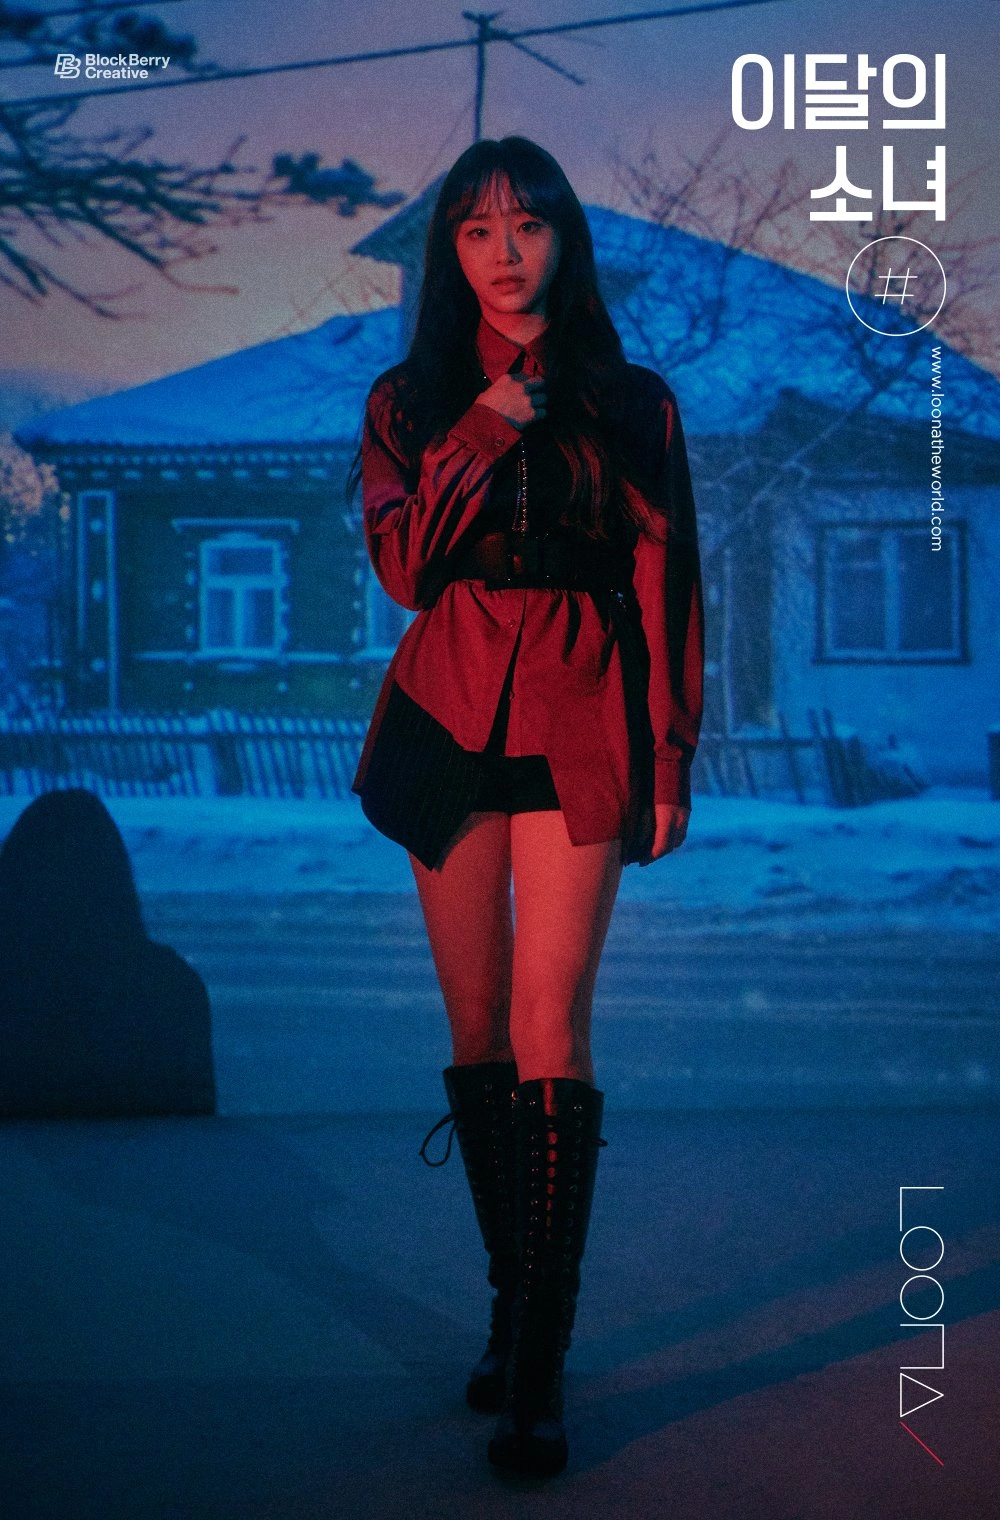 Loona # Hash Chuu Concept Teaser Picture Image Photo Kpop K-Concept 1